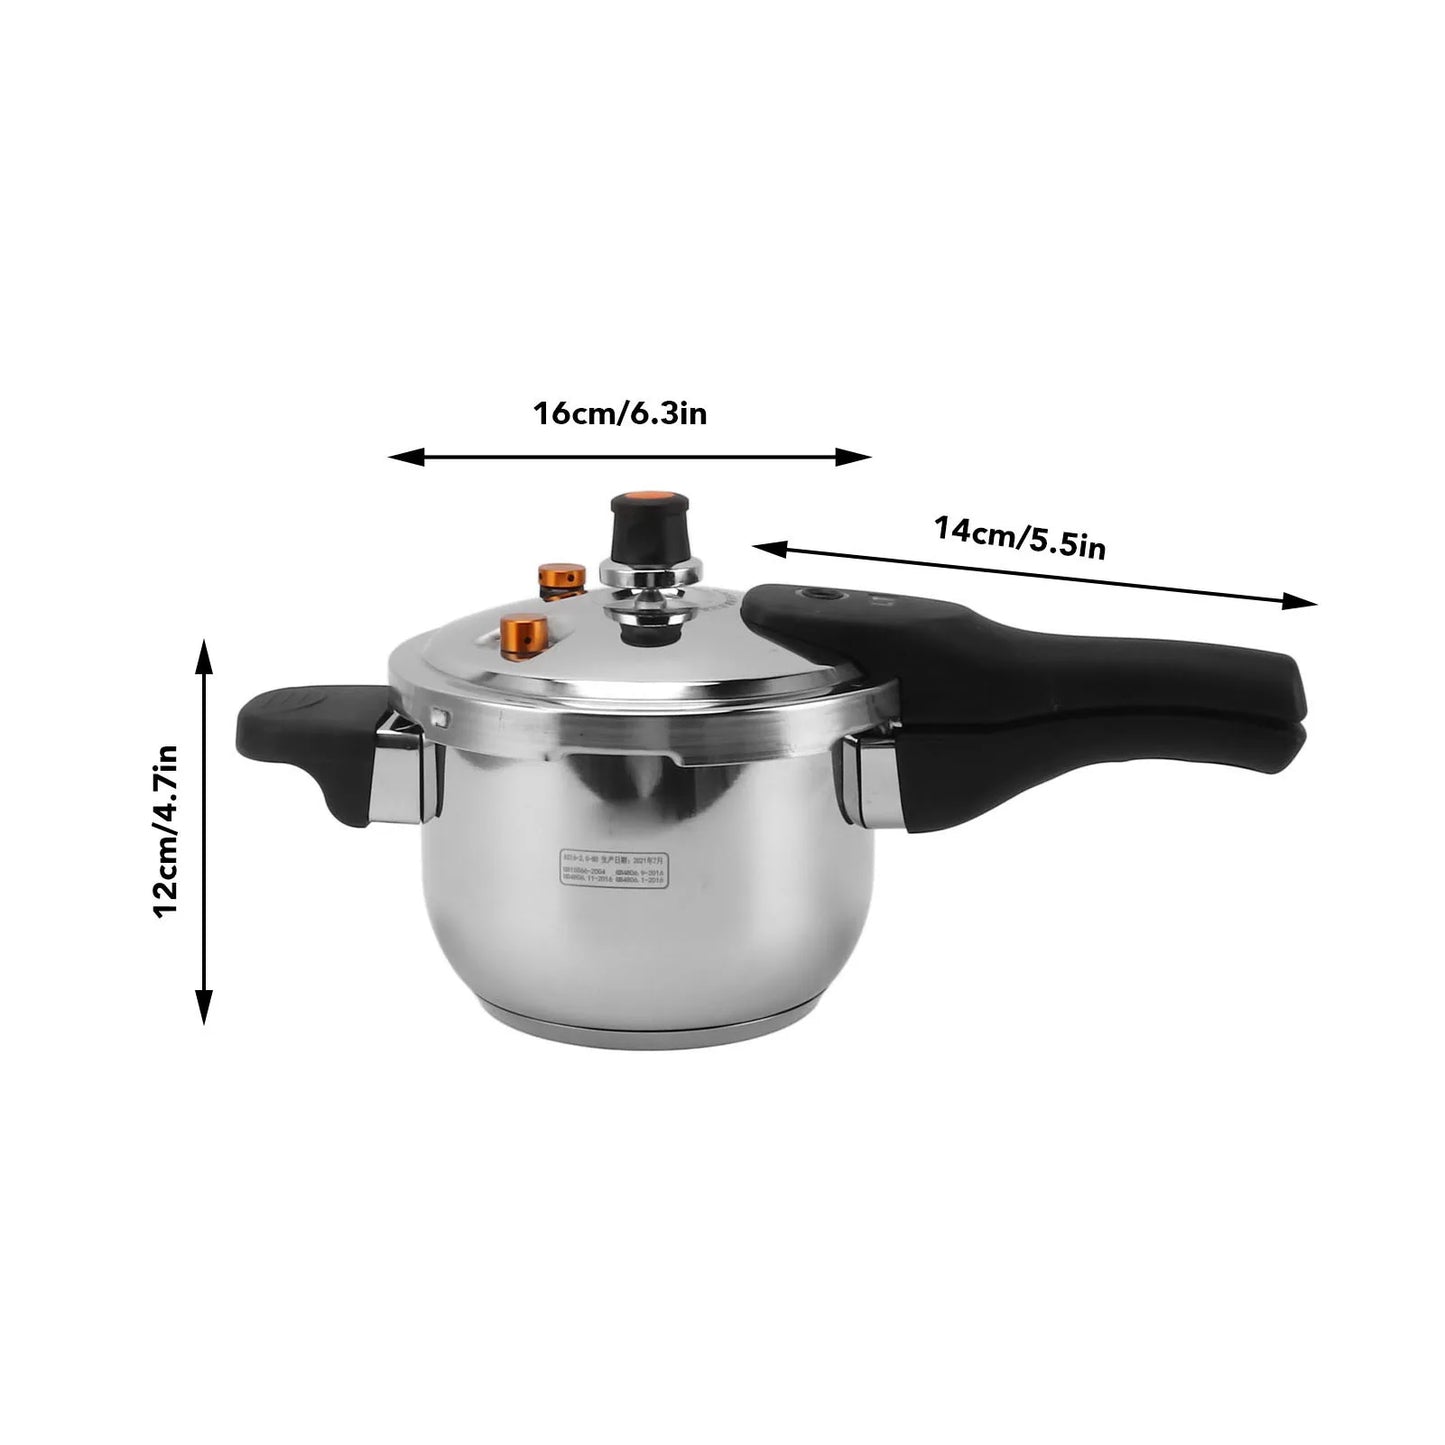 Pressure Cooker Comfortable Handle Mini Pressure Cooker Safety Valves Wearproof 304 Stainless Steel and Plastic for Apartment
Mini Pressure Cooker